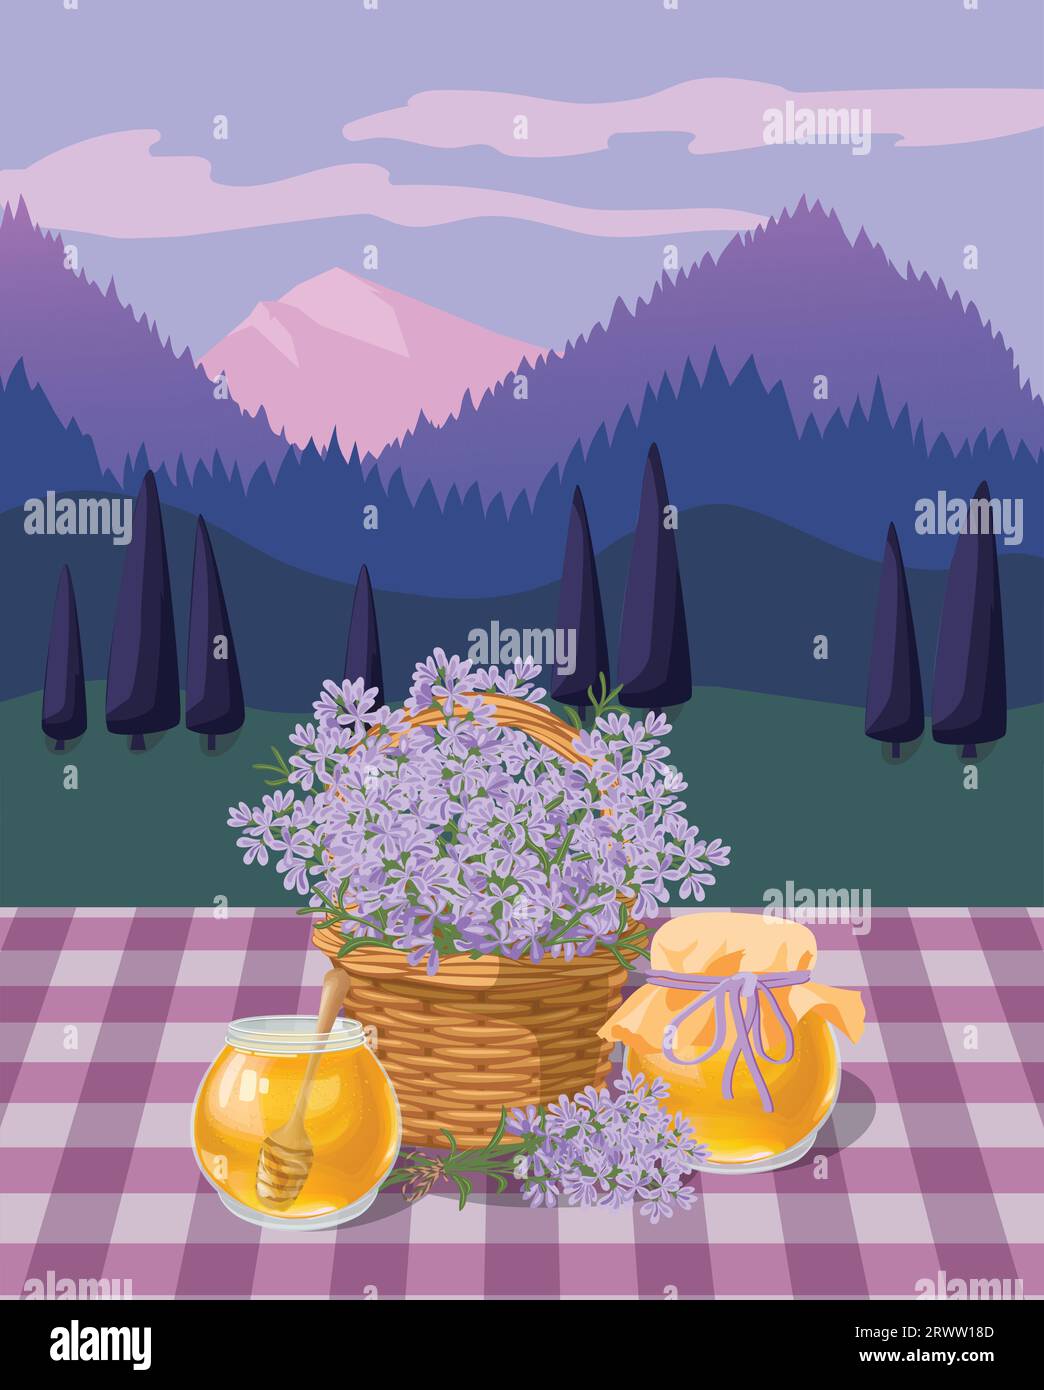 Vector illustration of hand drawn lavender honey jars with beautiful mountain view Stock Vector